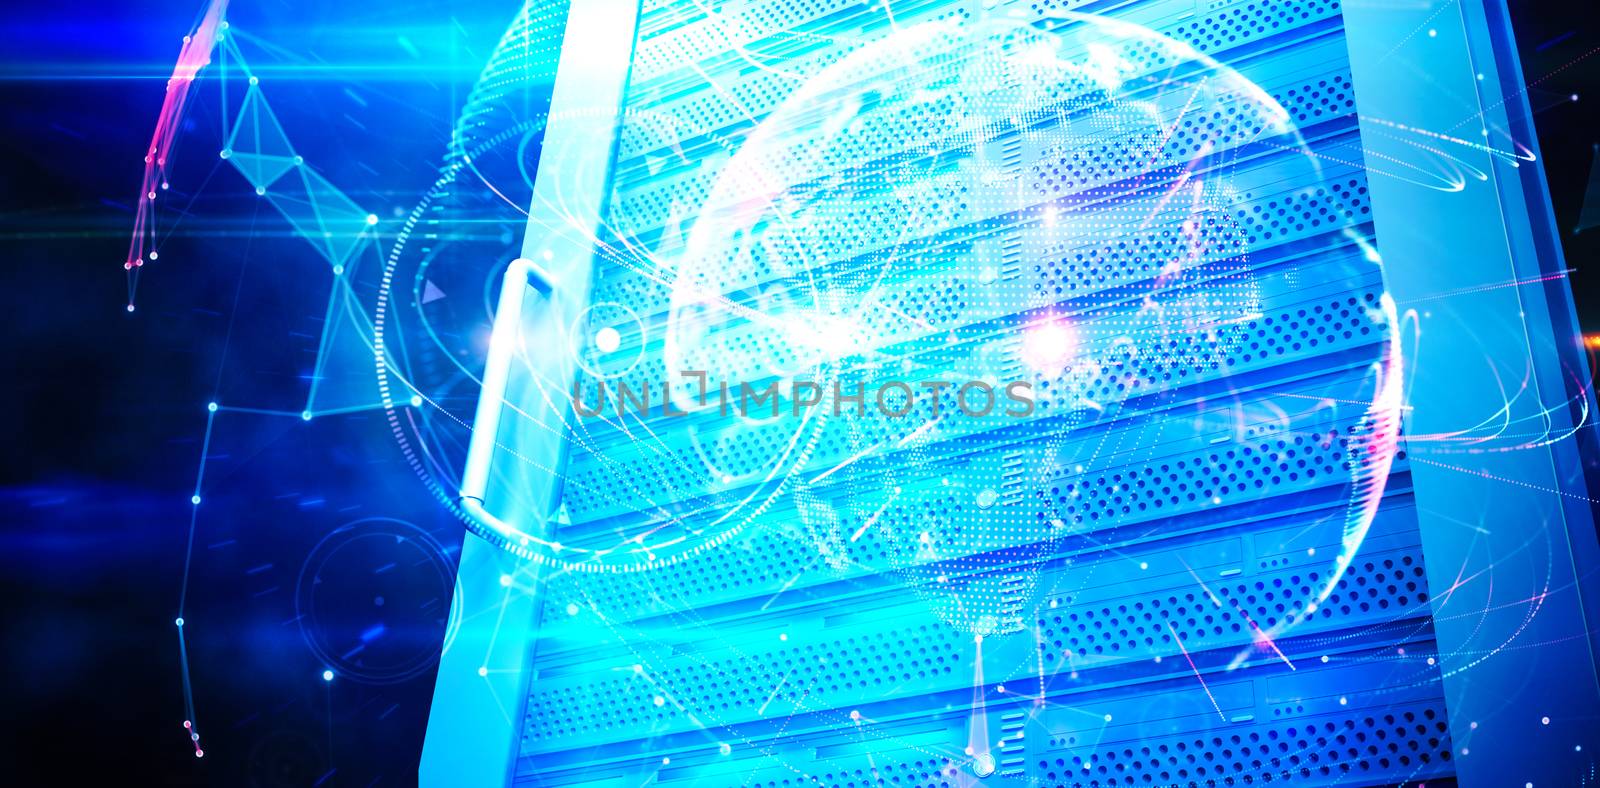 Composite image of global technology background in blue by Wavebreakmedia